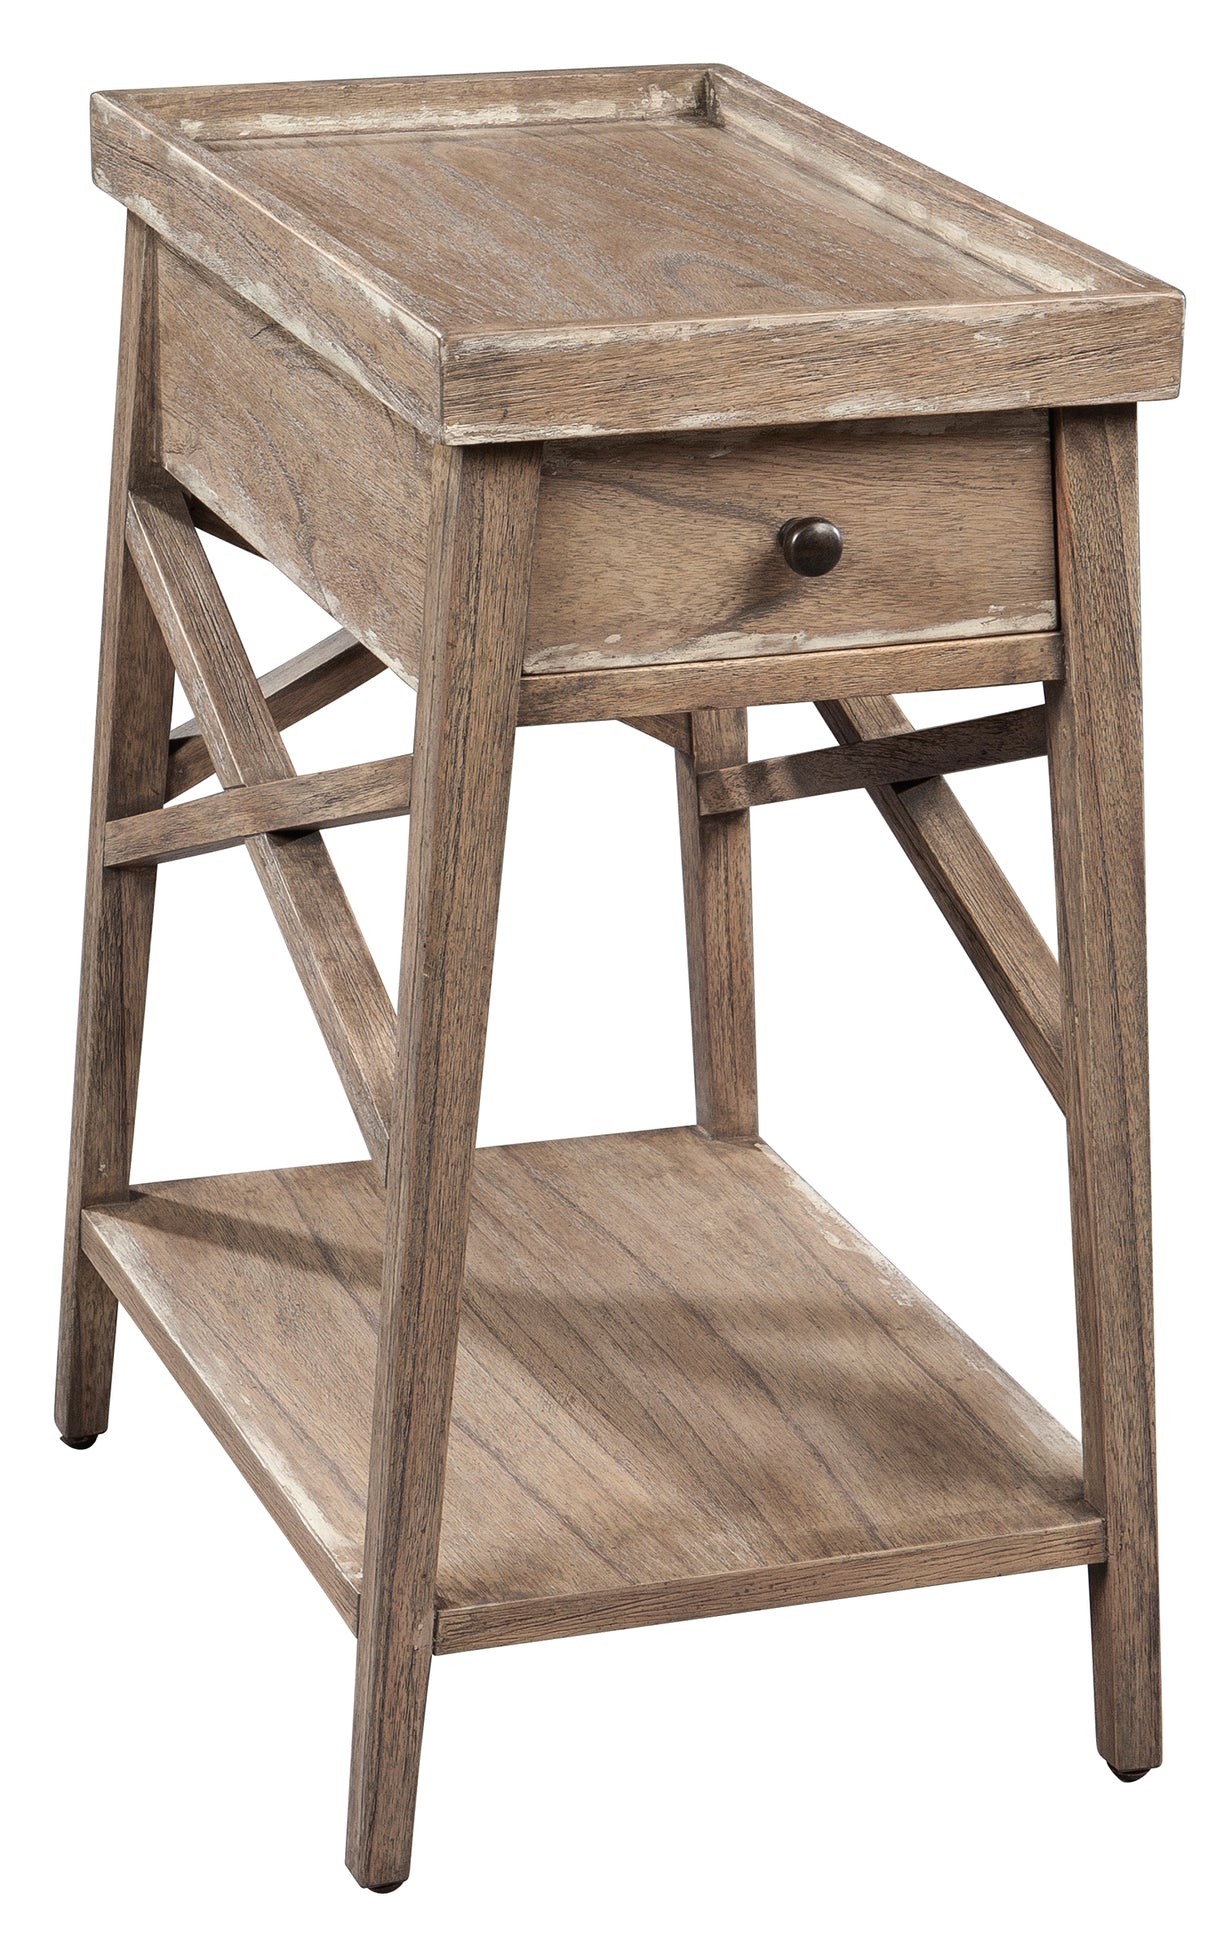 Hekman 27275 Accents 14in. x 20.25in. x 25.25in. End Table